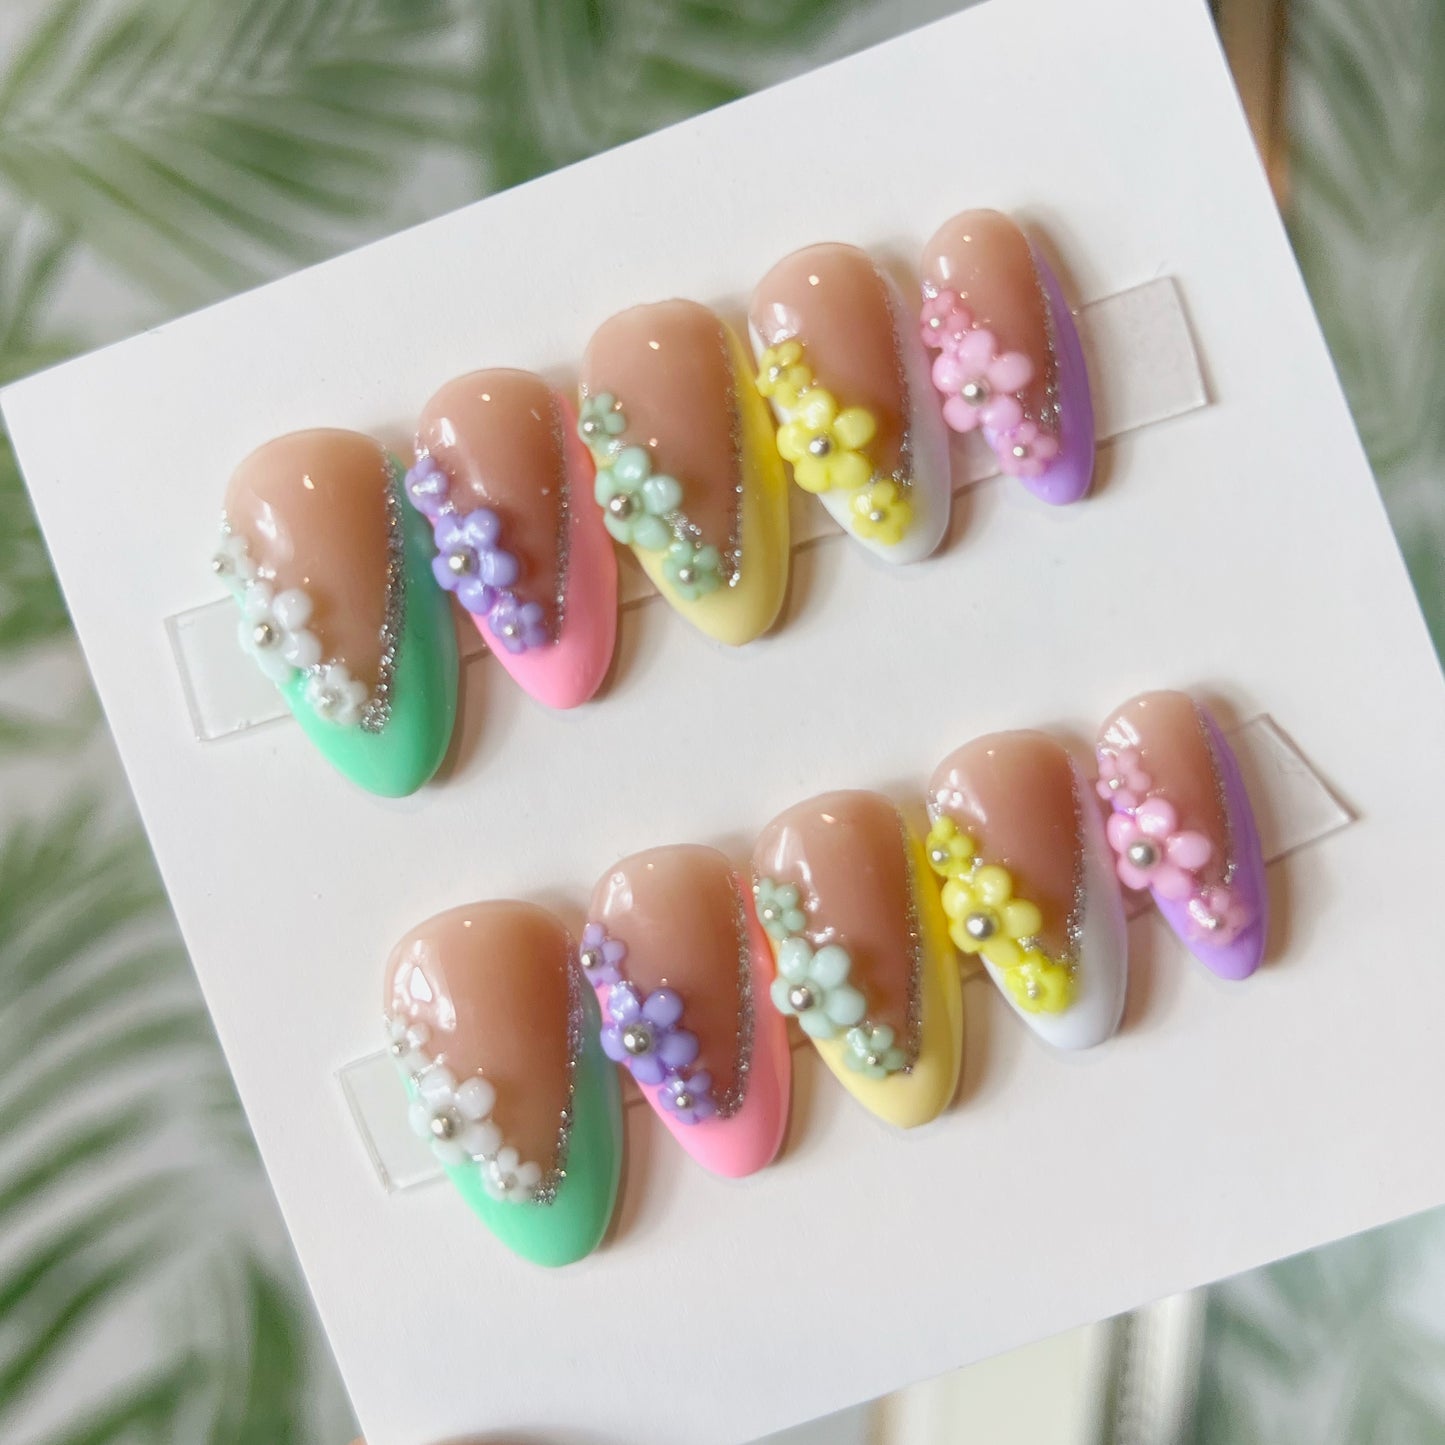 Multi Color Spring French Tip Acrylic Press on nails